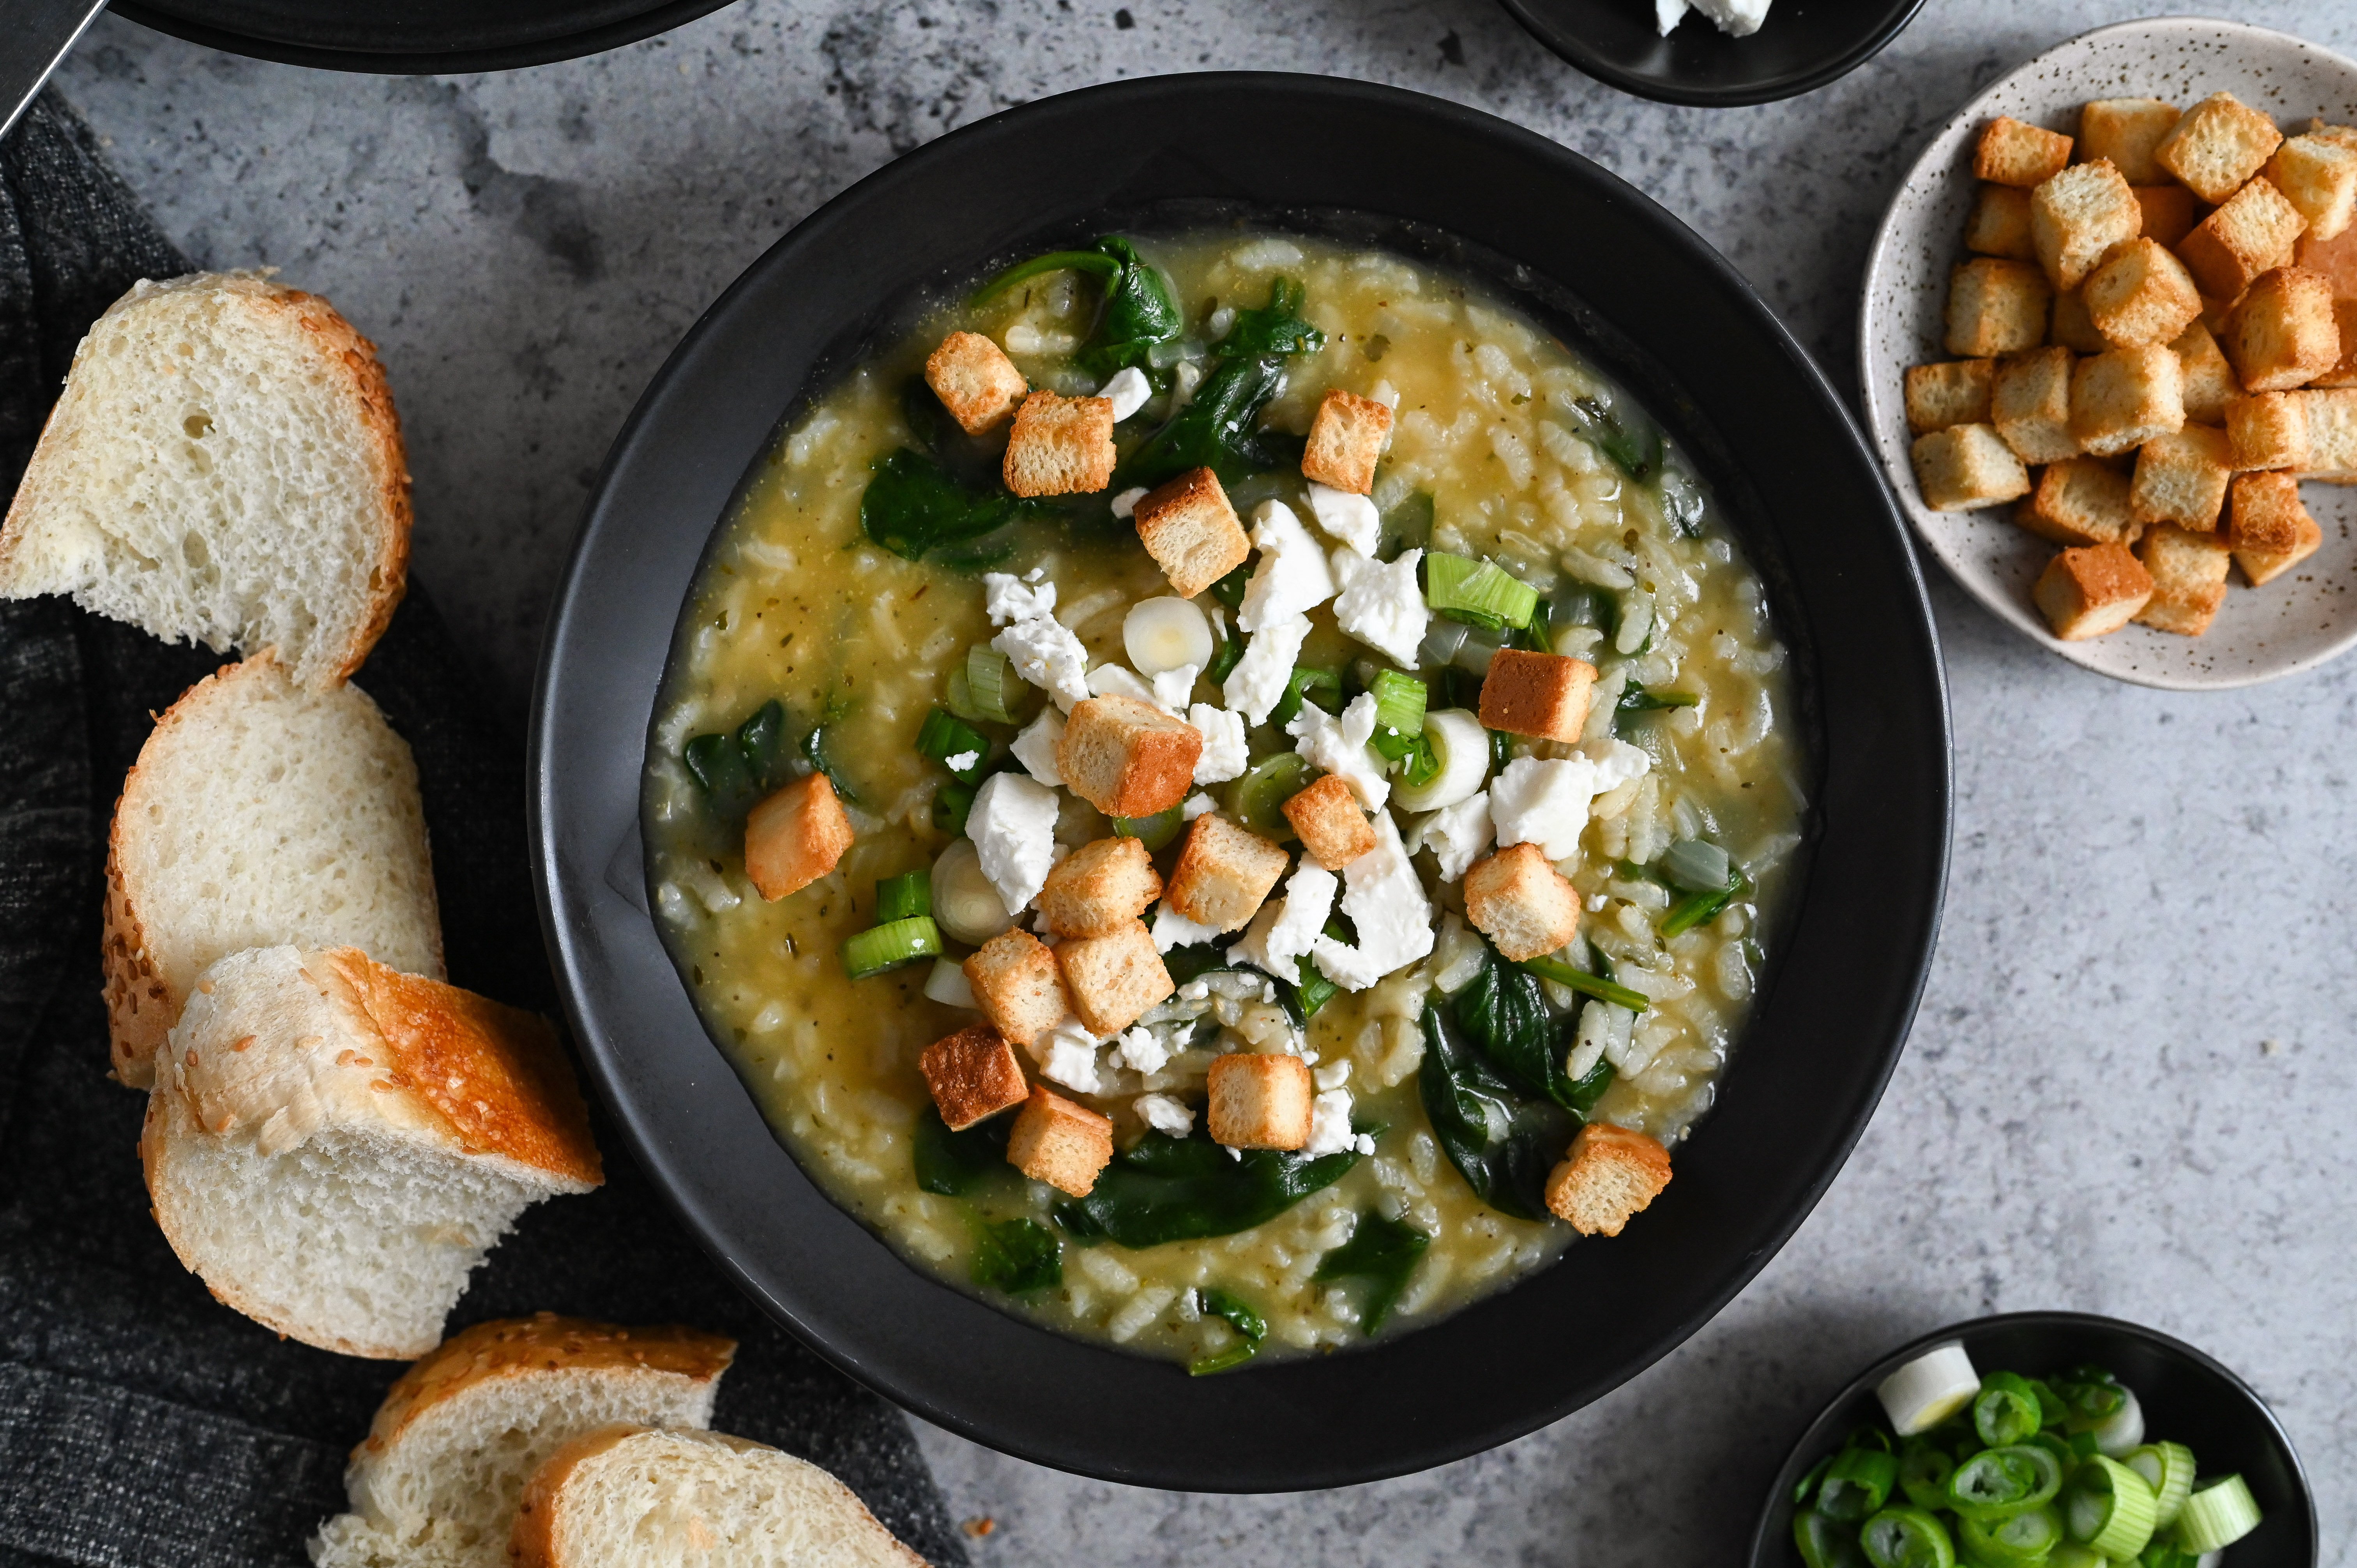 Spinach and rice soup (Σούπα με σπανάκι και ρύζι)